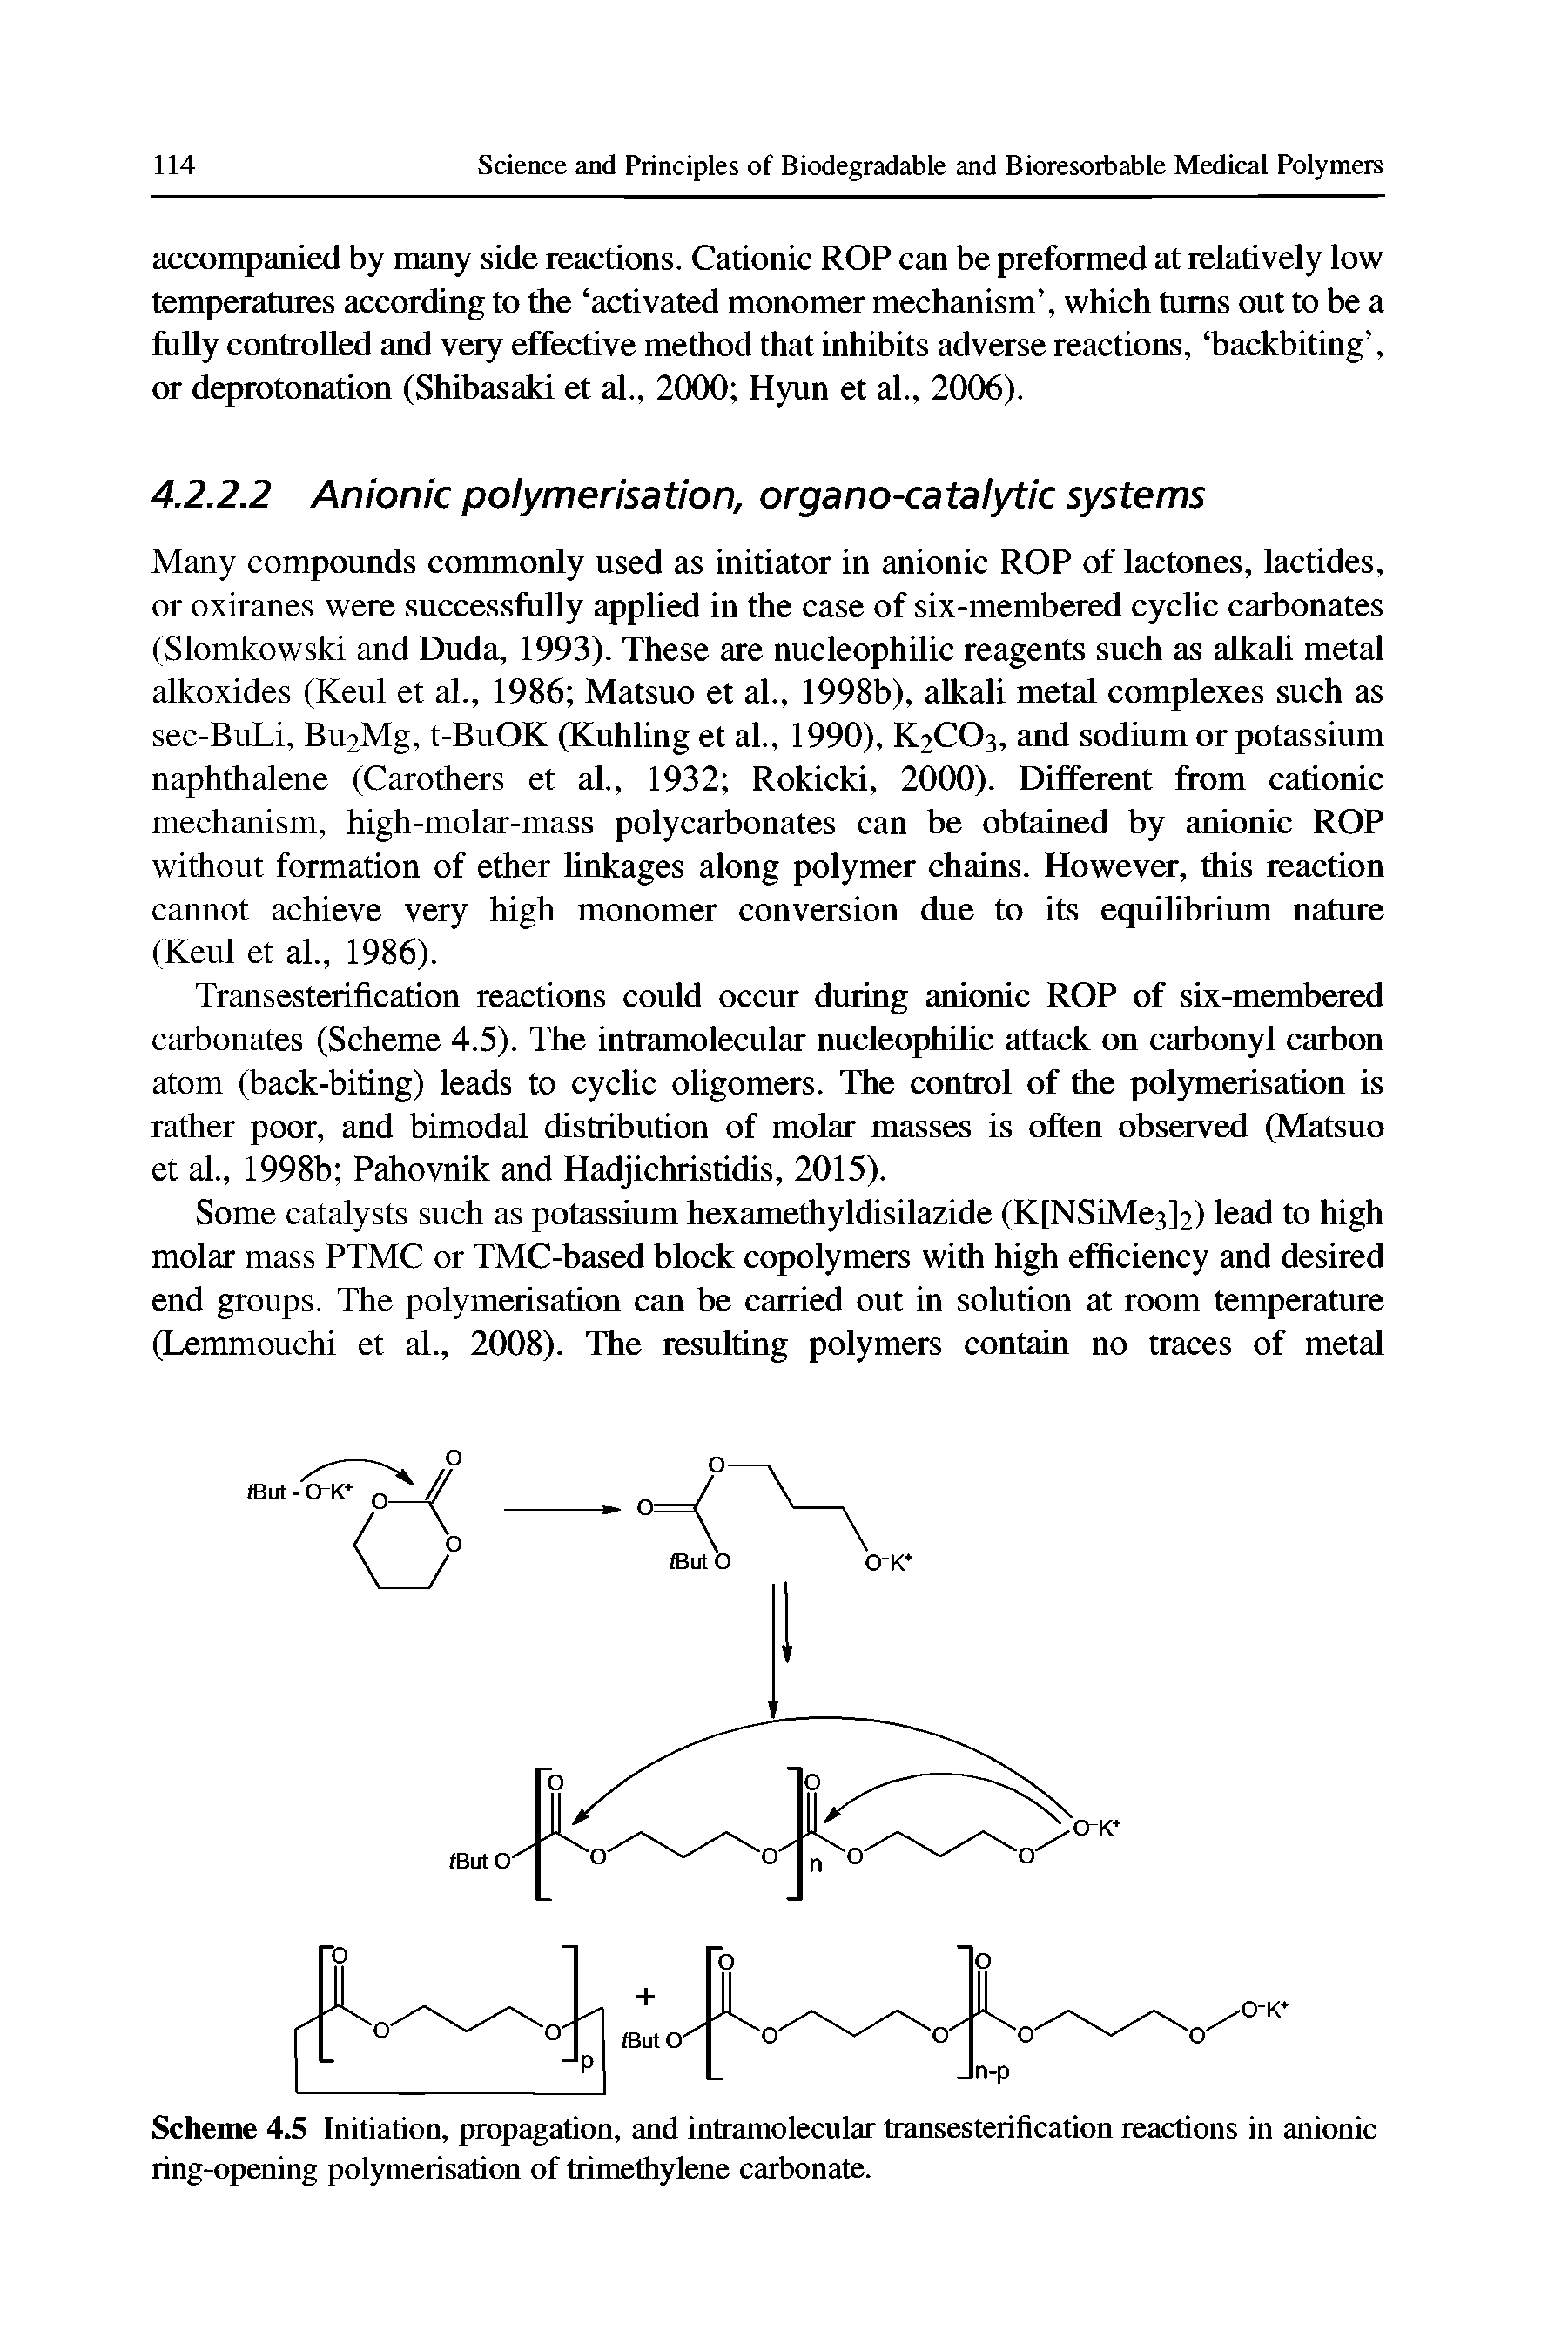 Scheme 4,5 Initiation, propagation, and intramolecular transesteriiication reactions in anionic ring-opening polymerisation of trimethylene carbonate.